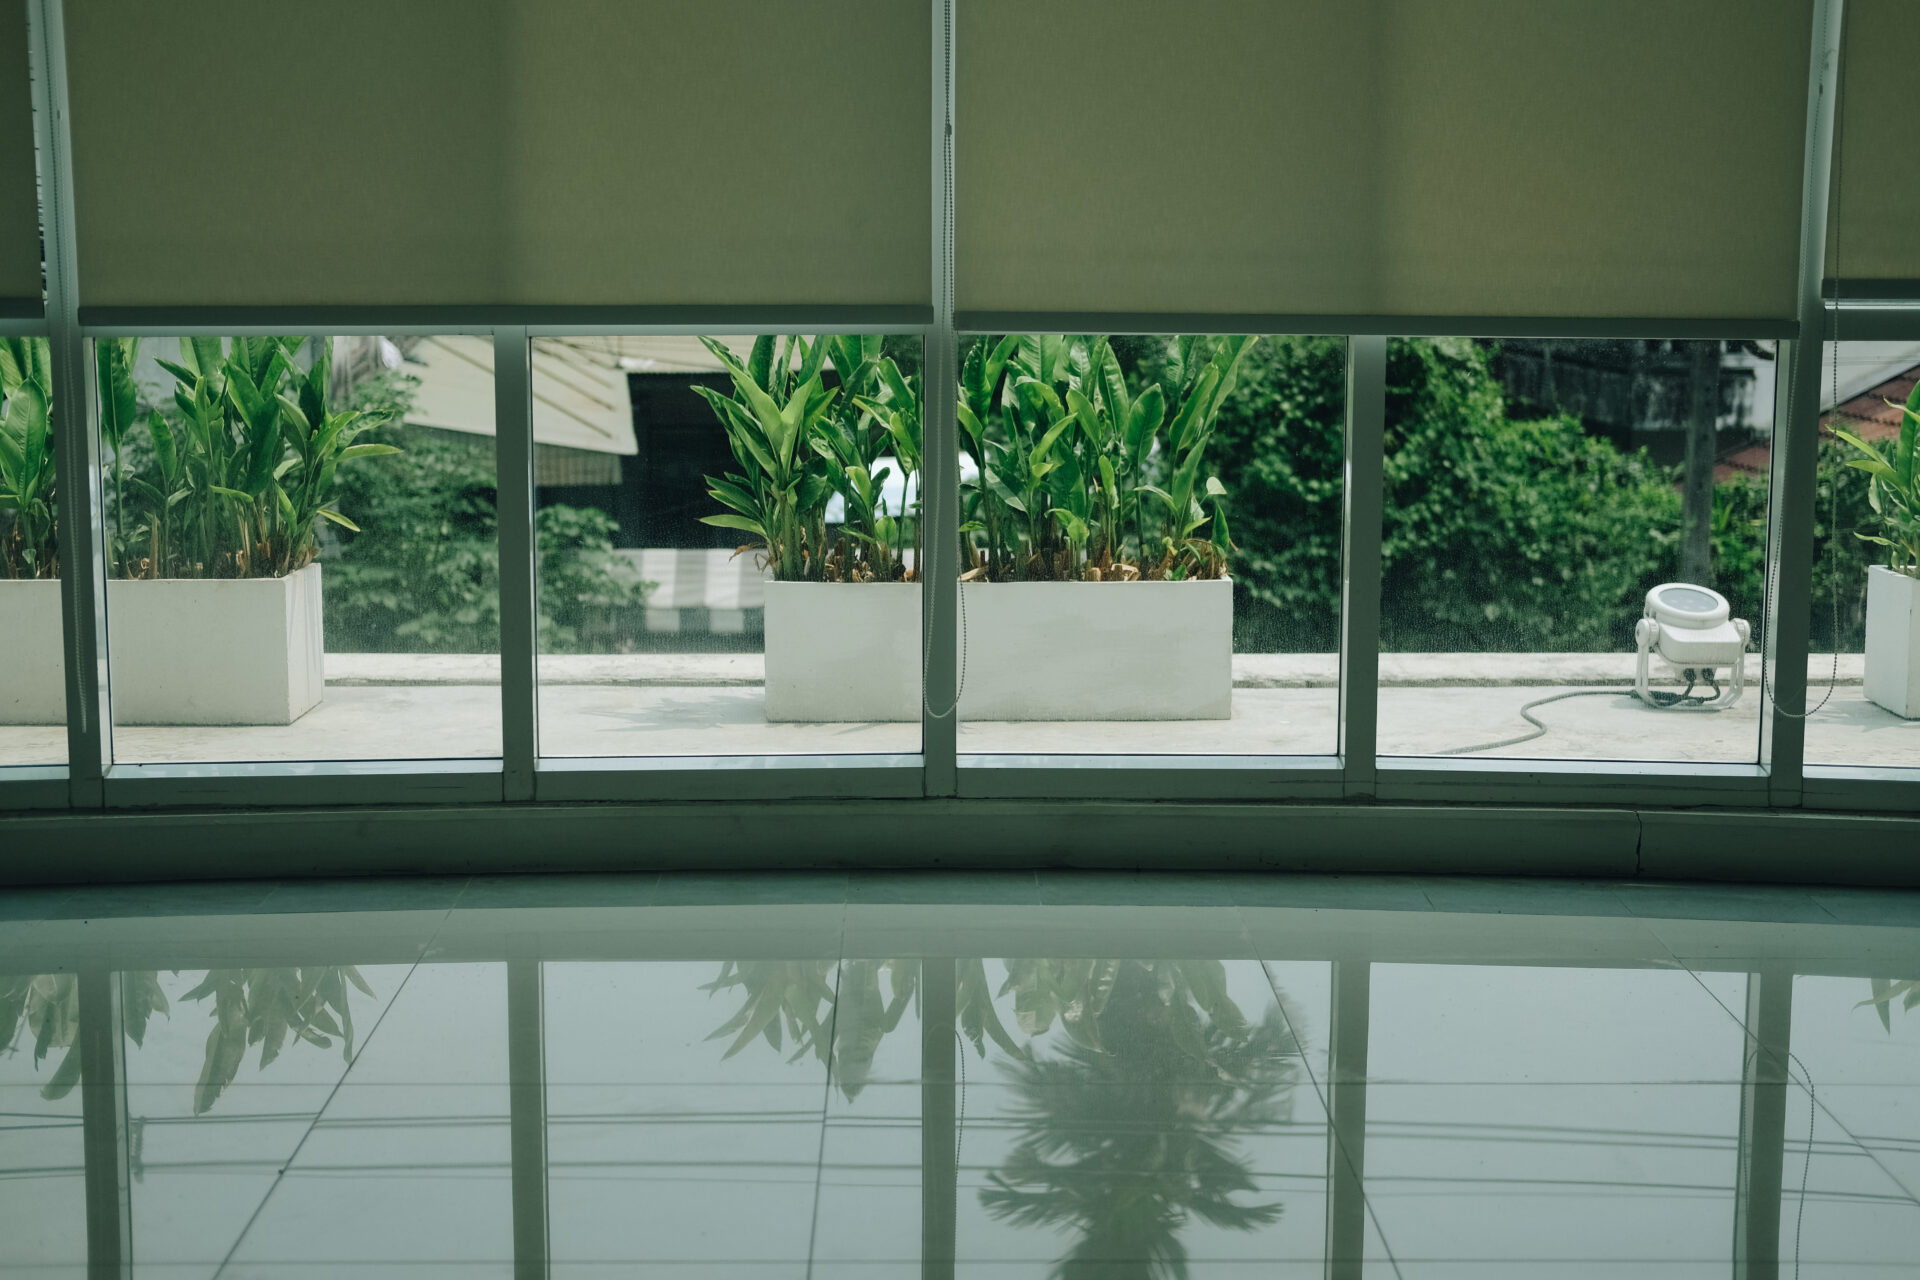 Automated roller shades in panel windows in a modern home with plants and trees. Wholesale Blind Factory